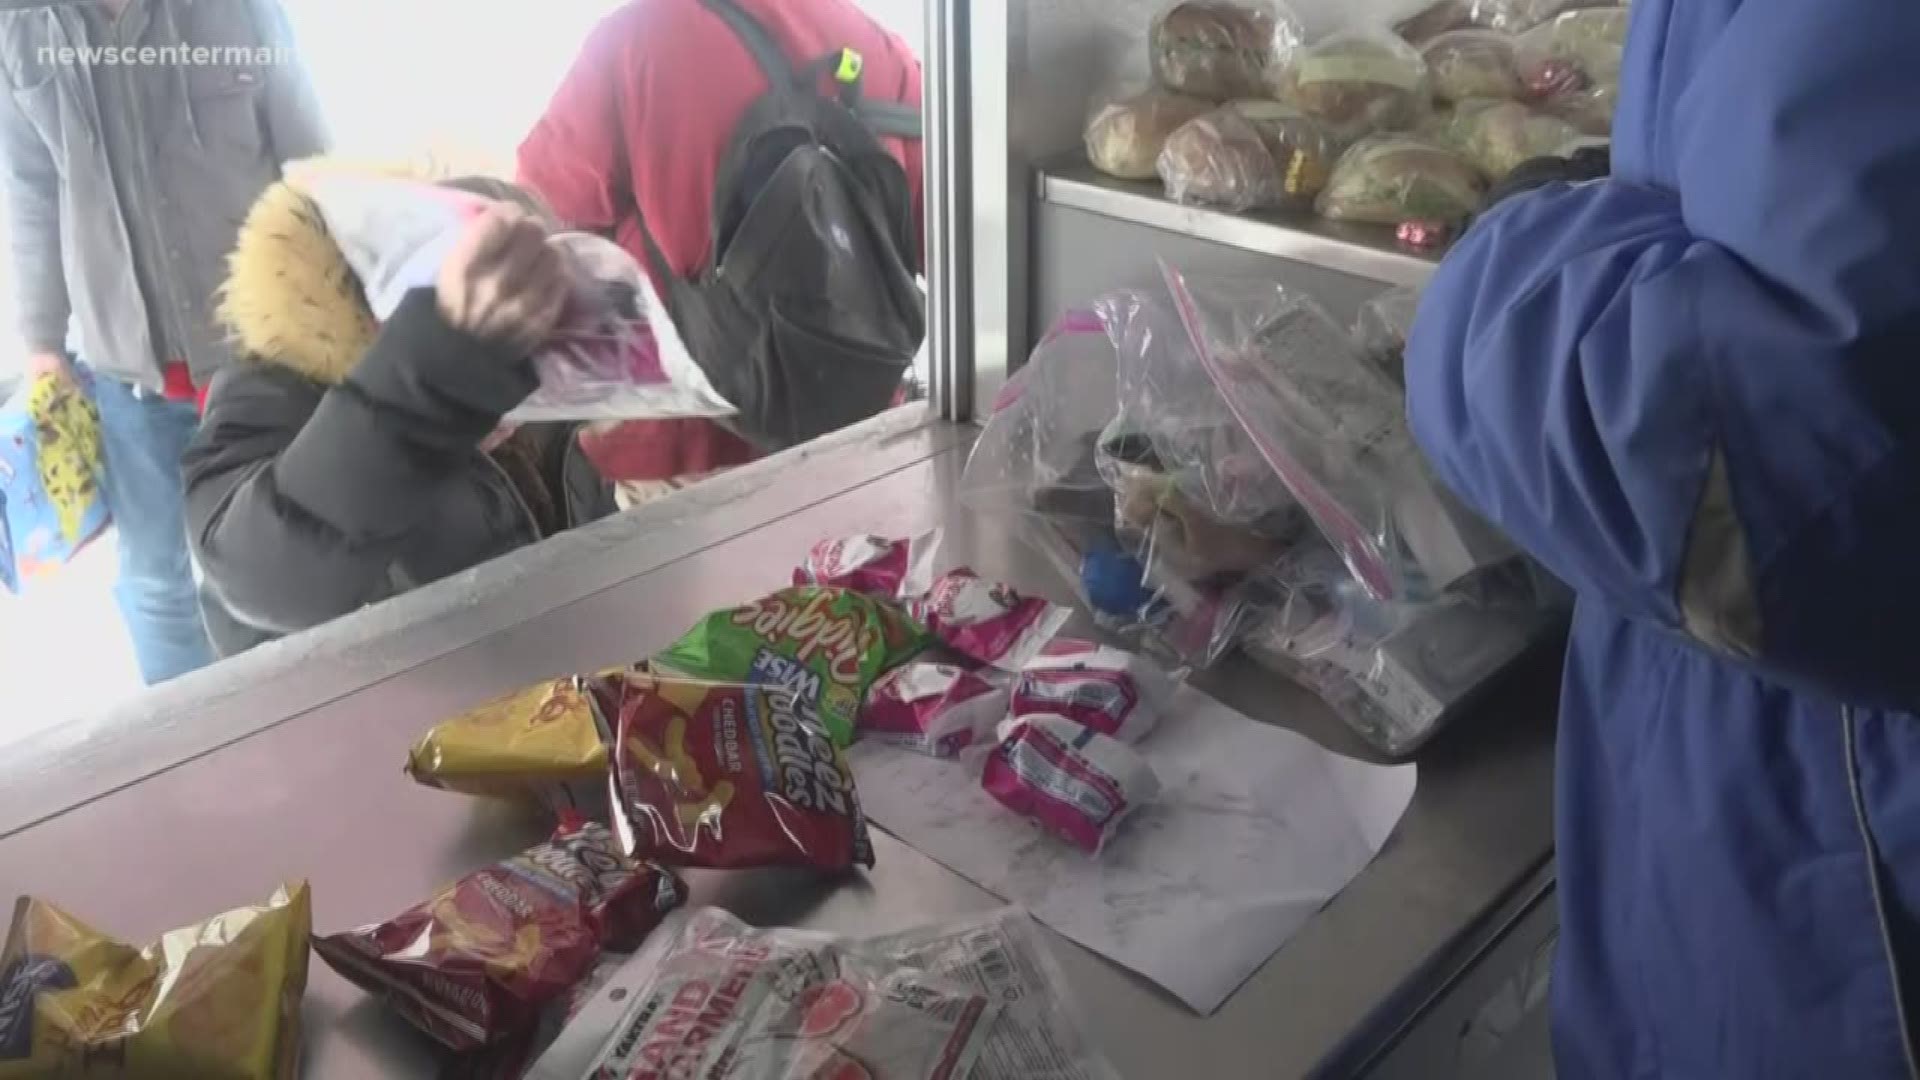 Homeless and hungry receive 'Blessing Bags'